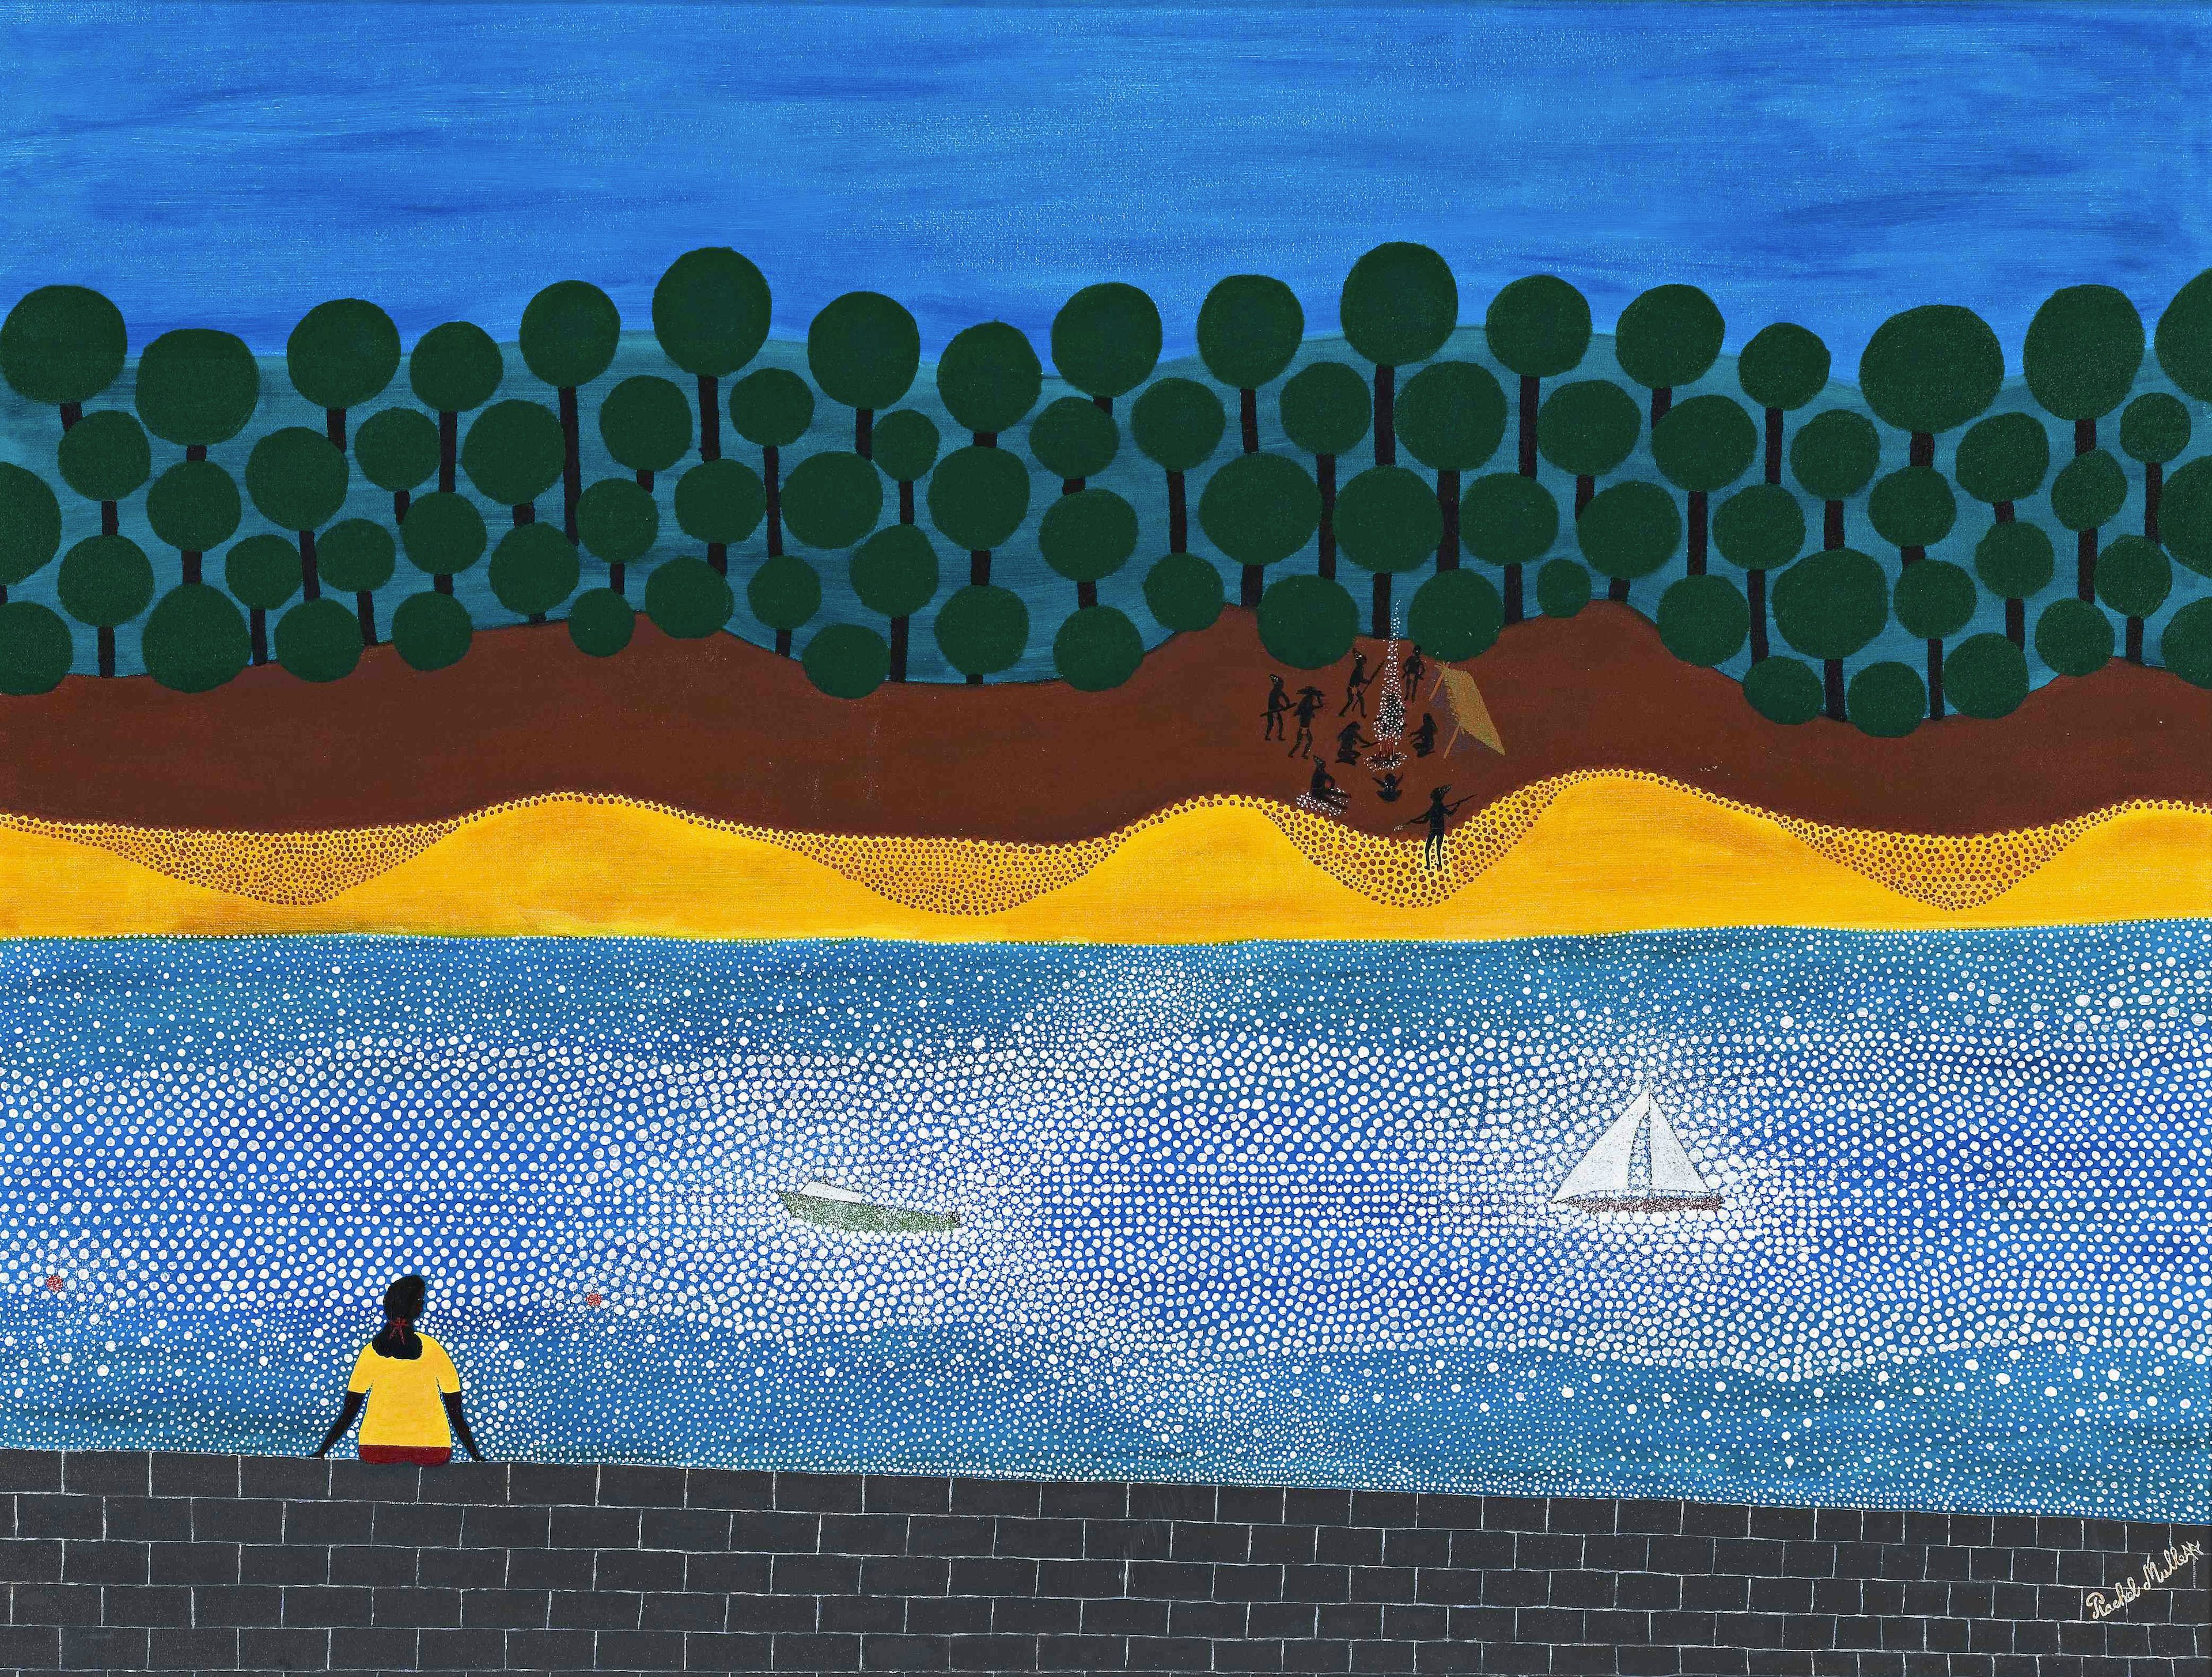 Painting of a person looking out over water with a sandy bank and trees opposite them